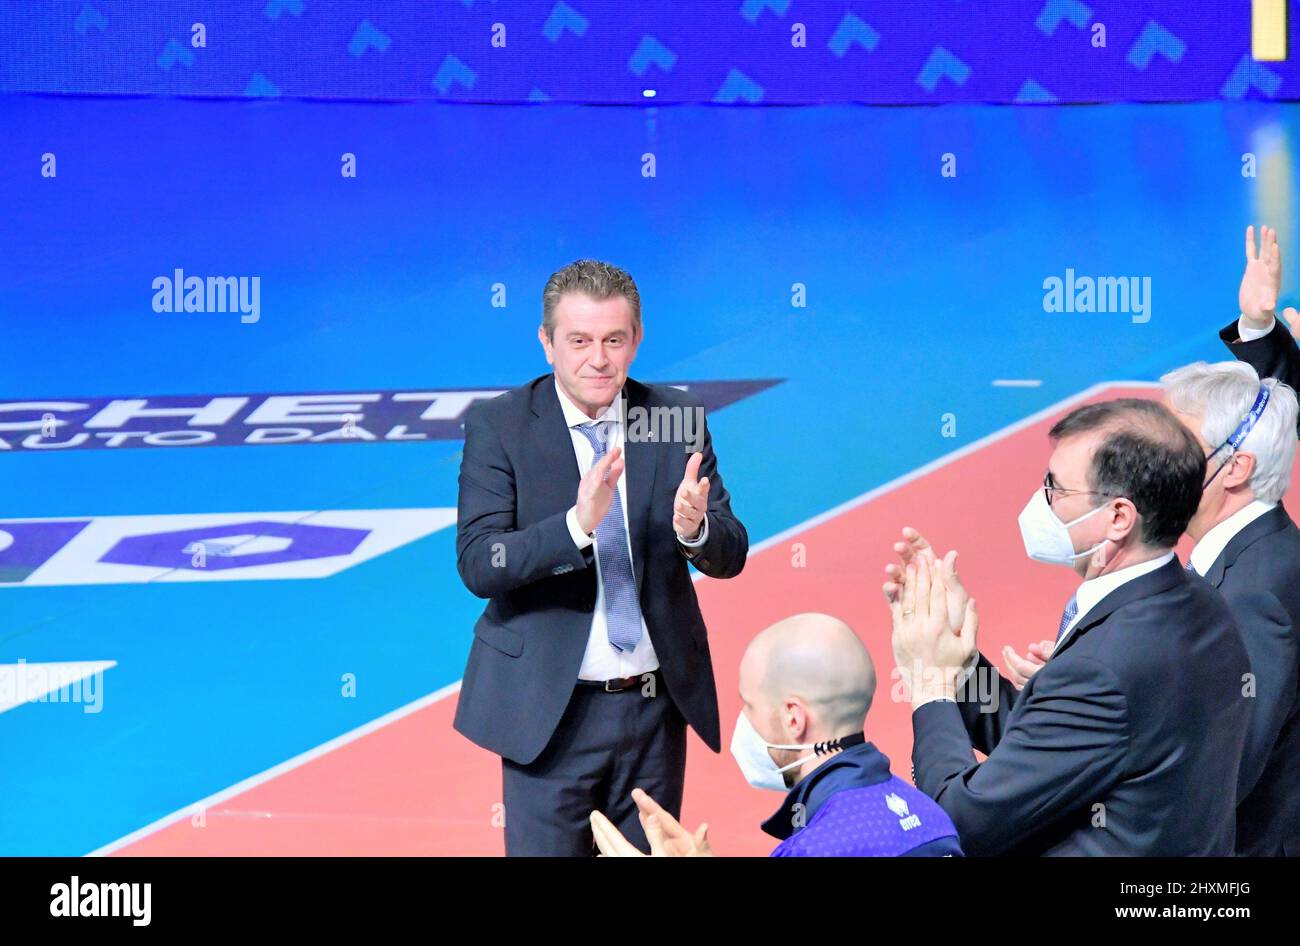 Trento, Italy. 13th Mar, 2022. Coach Angelo Lorenzetti (Itas Trentino) during Itas Trentino vs Allianz Milano, Volleyball Italian Serie A Men Superleague Championship in Trento, Italy, March 13 2022 Credit: Independent Photo Agency/Alamy Live News Stock Photo